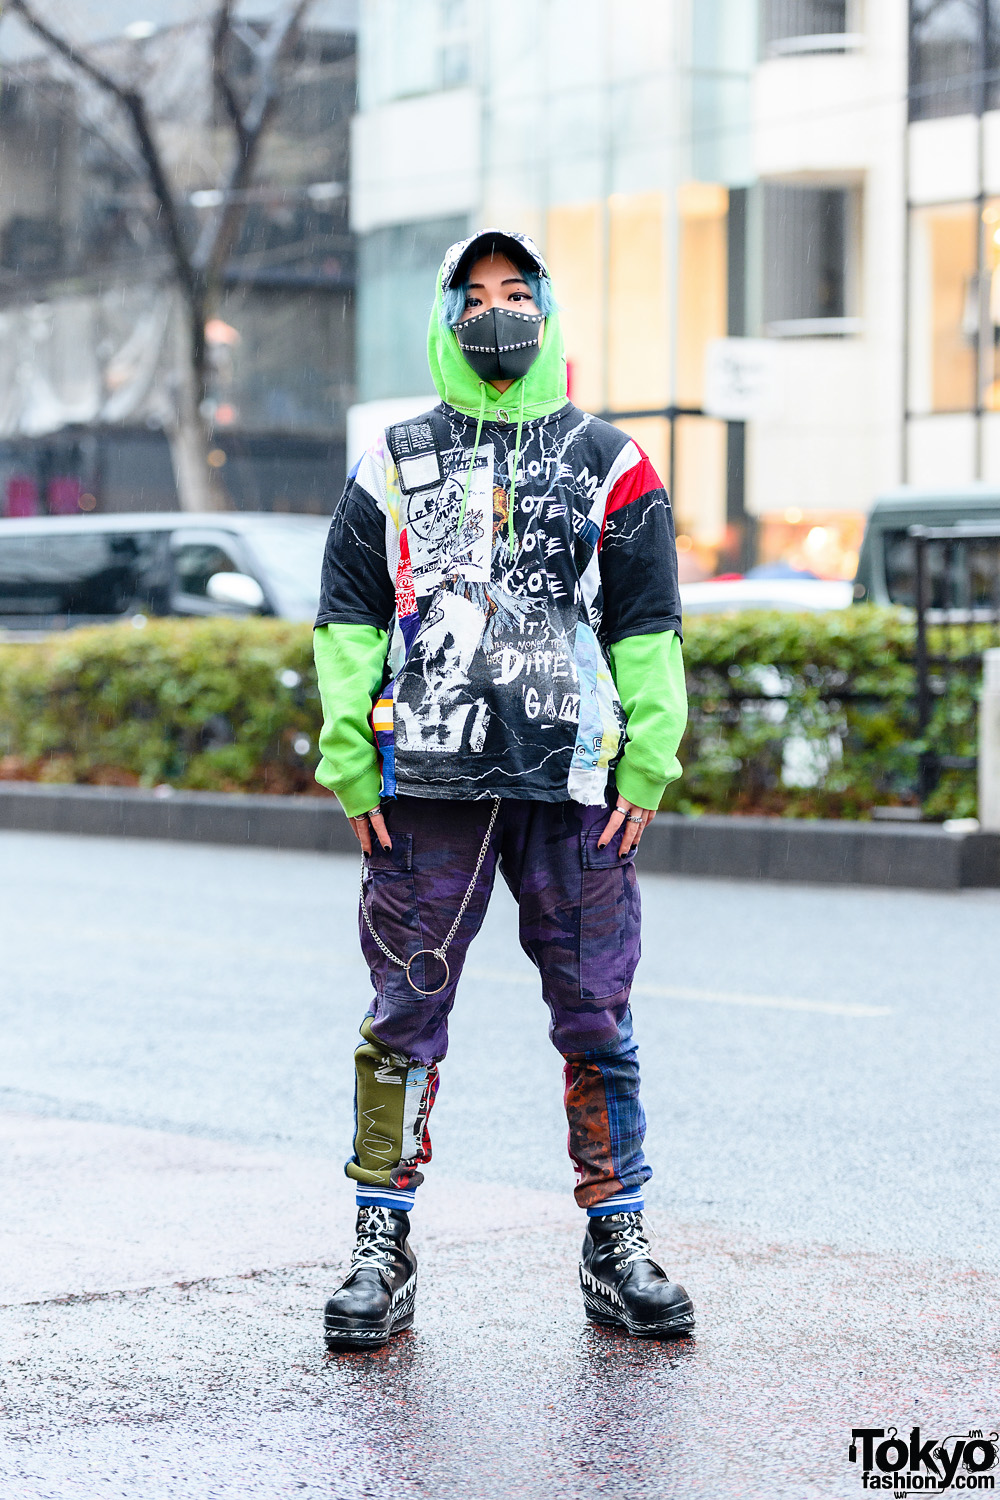 Cote Mer Tokyo Graphic Streetwear Style w/ Studded Face Mask, Graphic Shirt, M&Ms Hoodie, Color Camo Pants & Platform Boots Tokyo Fashion